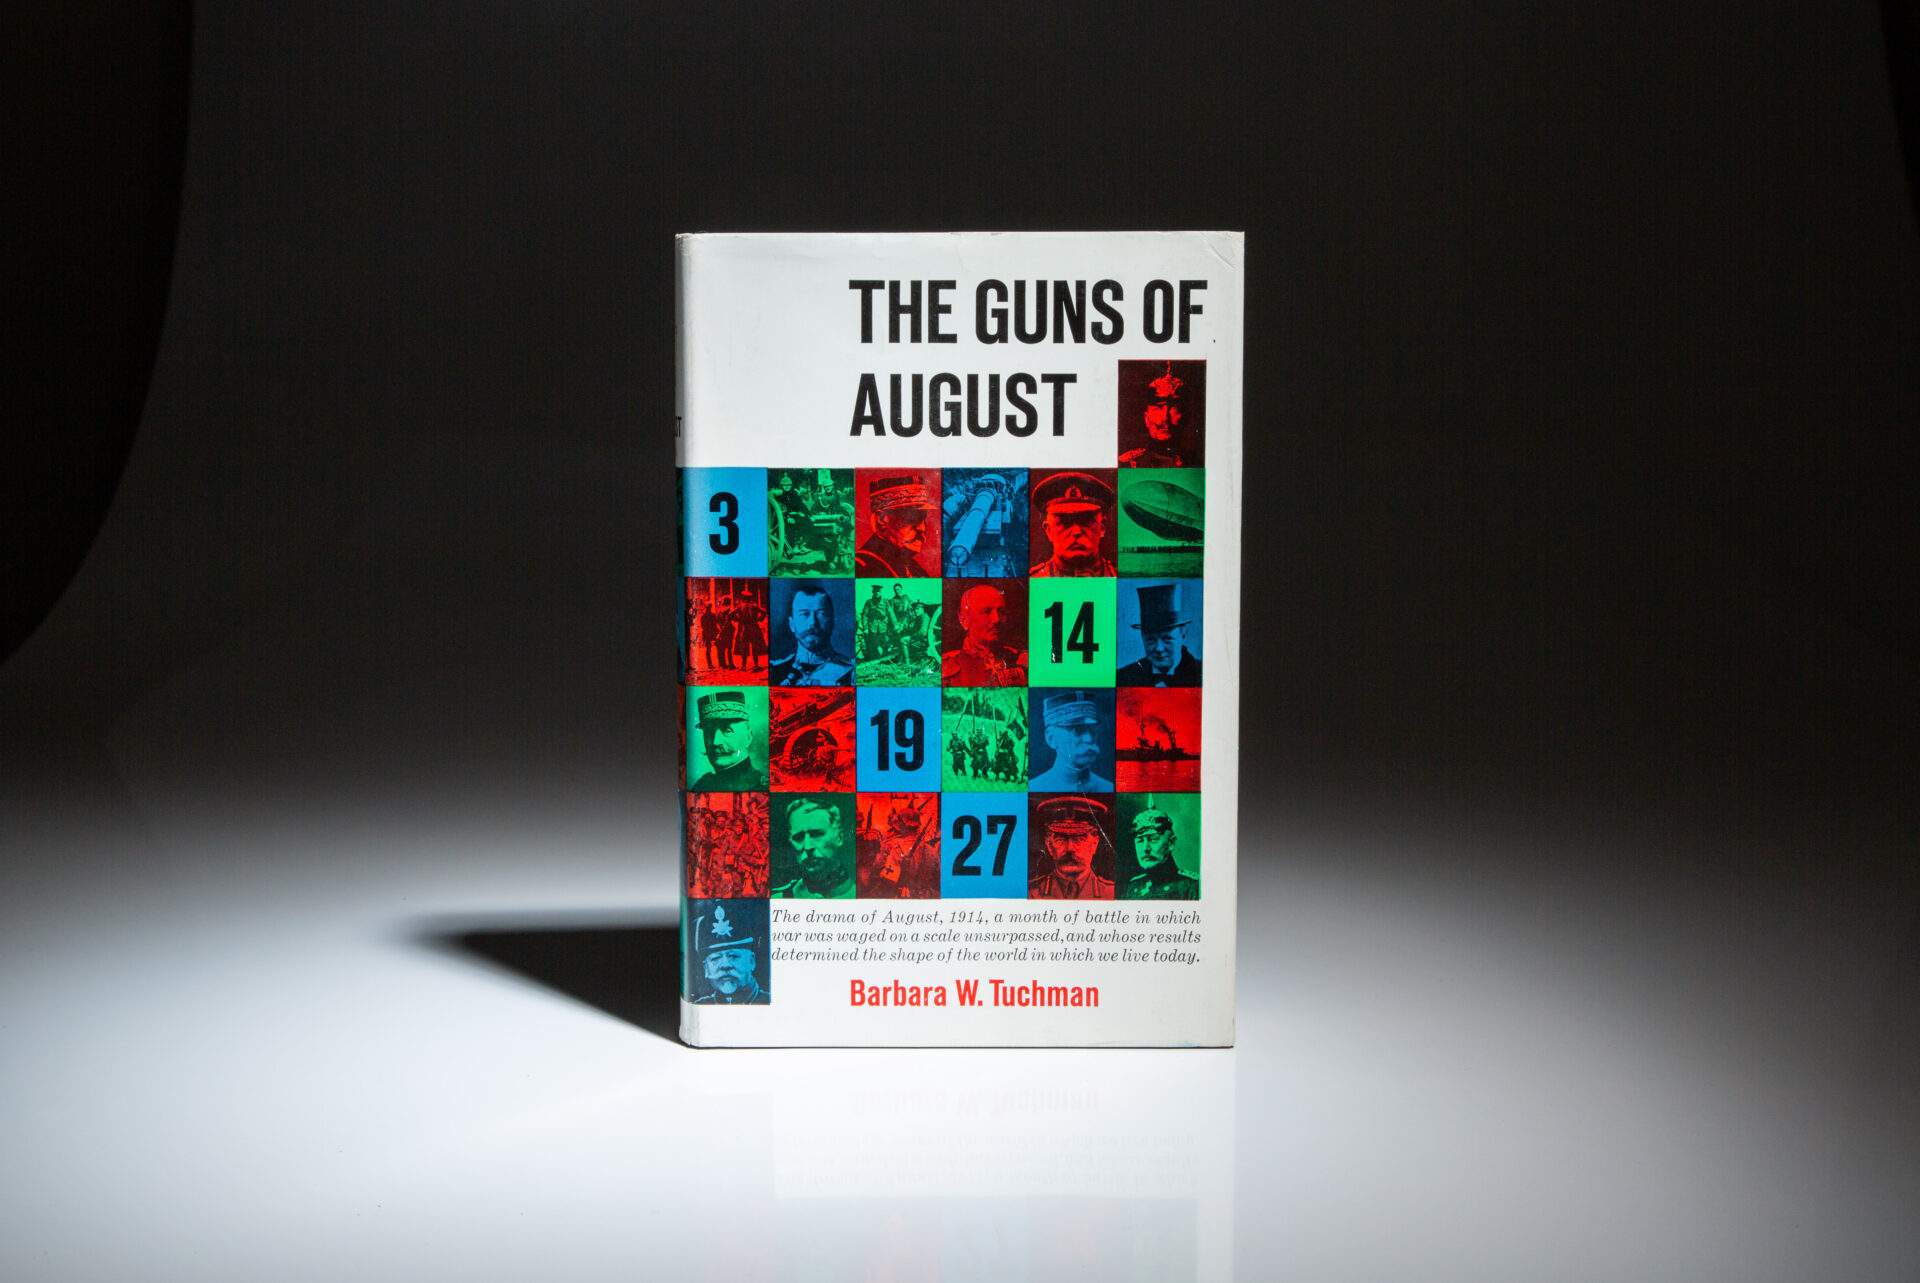 14-mind-blowing-facts-about-the-guns-of-august-barbara-w-tuchman